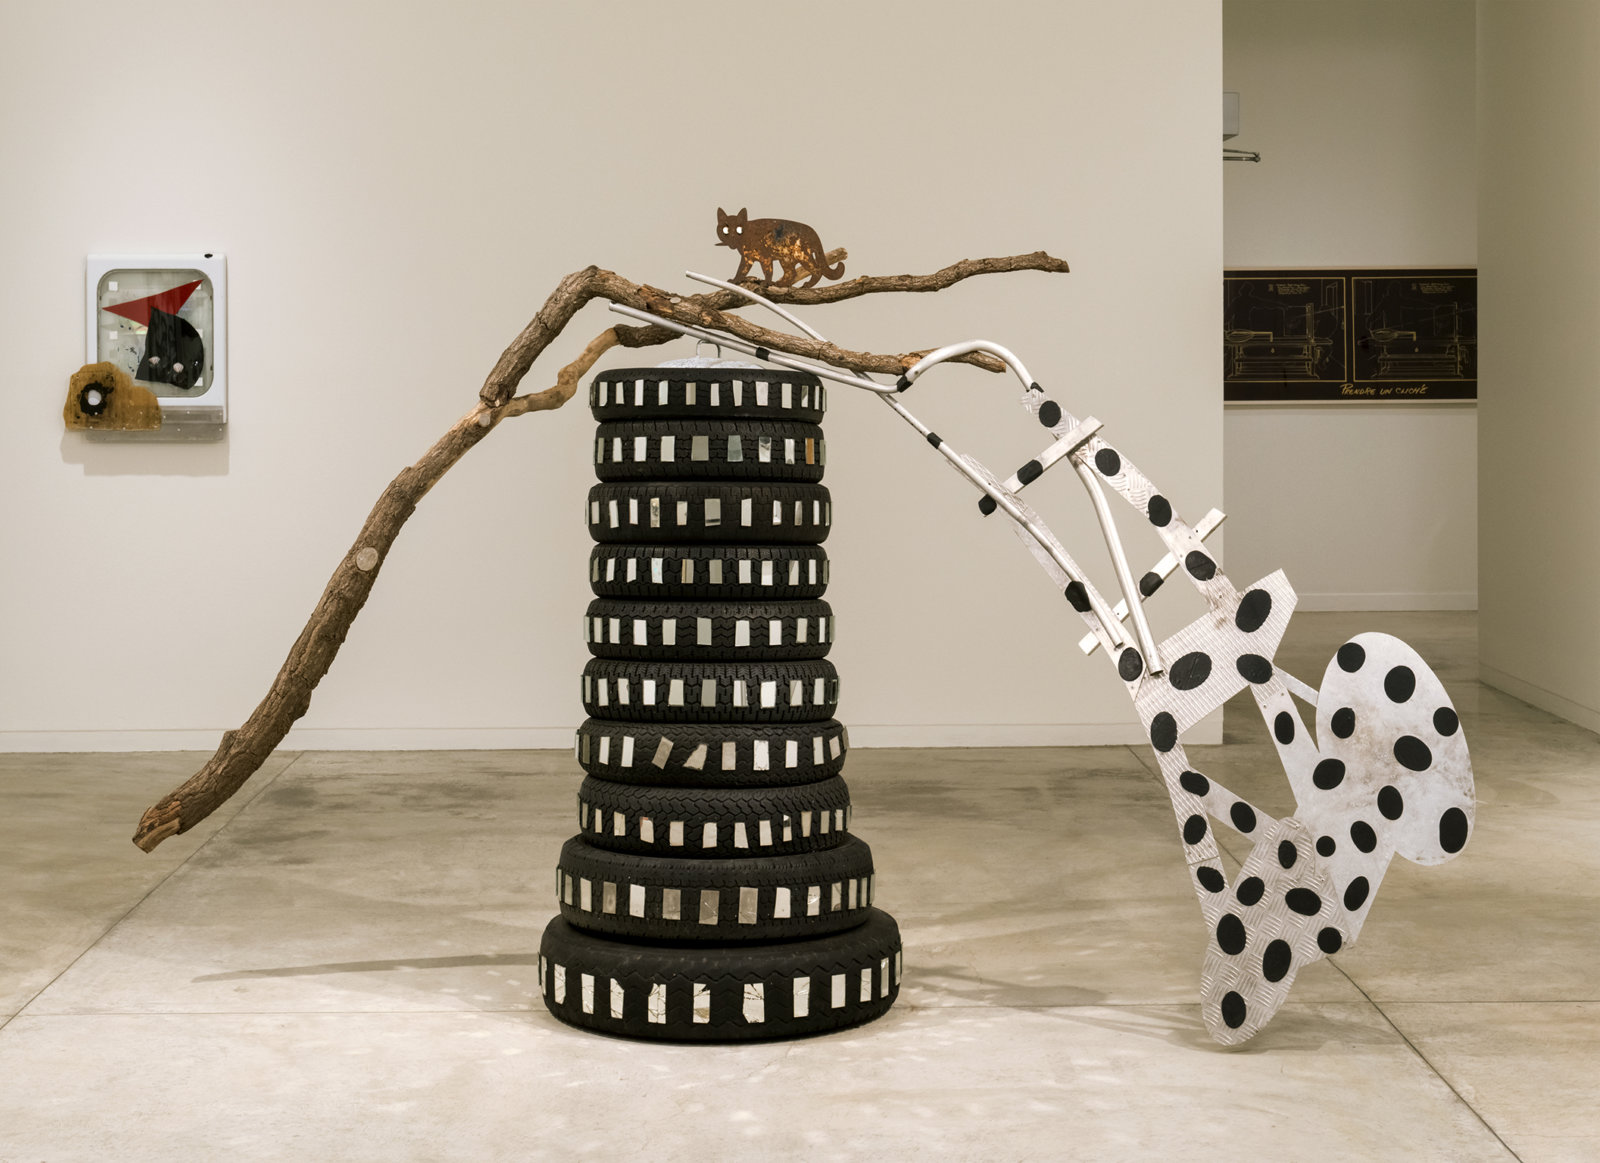 Jerry Pethick, Toy Tower/Whose Limbs are we out on?, 1985, rubber tires, aluminum, mirror, silicone, glass, wooden branch, 118 x 75 x 33 in. (300 x 190 x 84 cm)